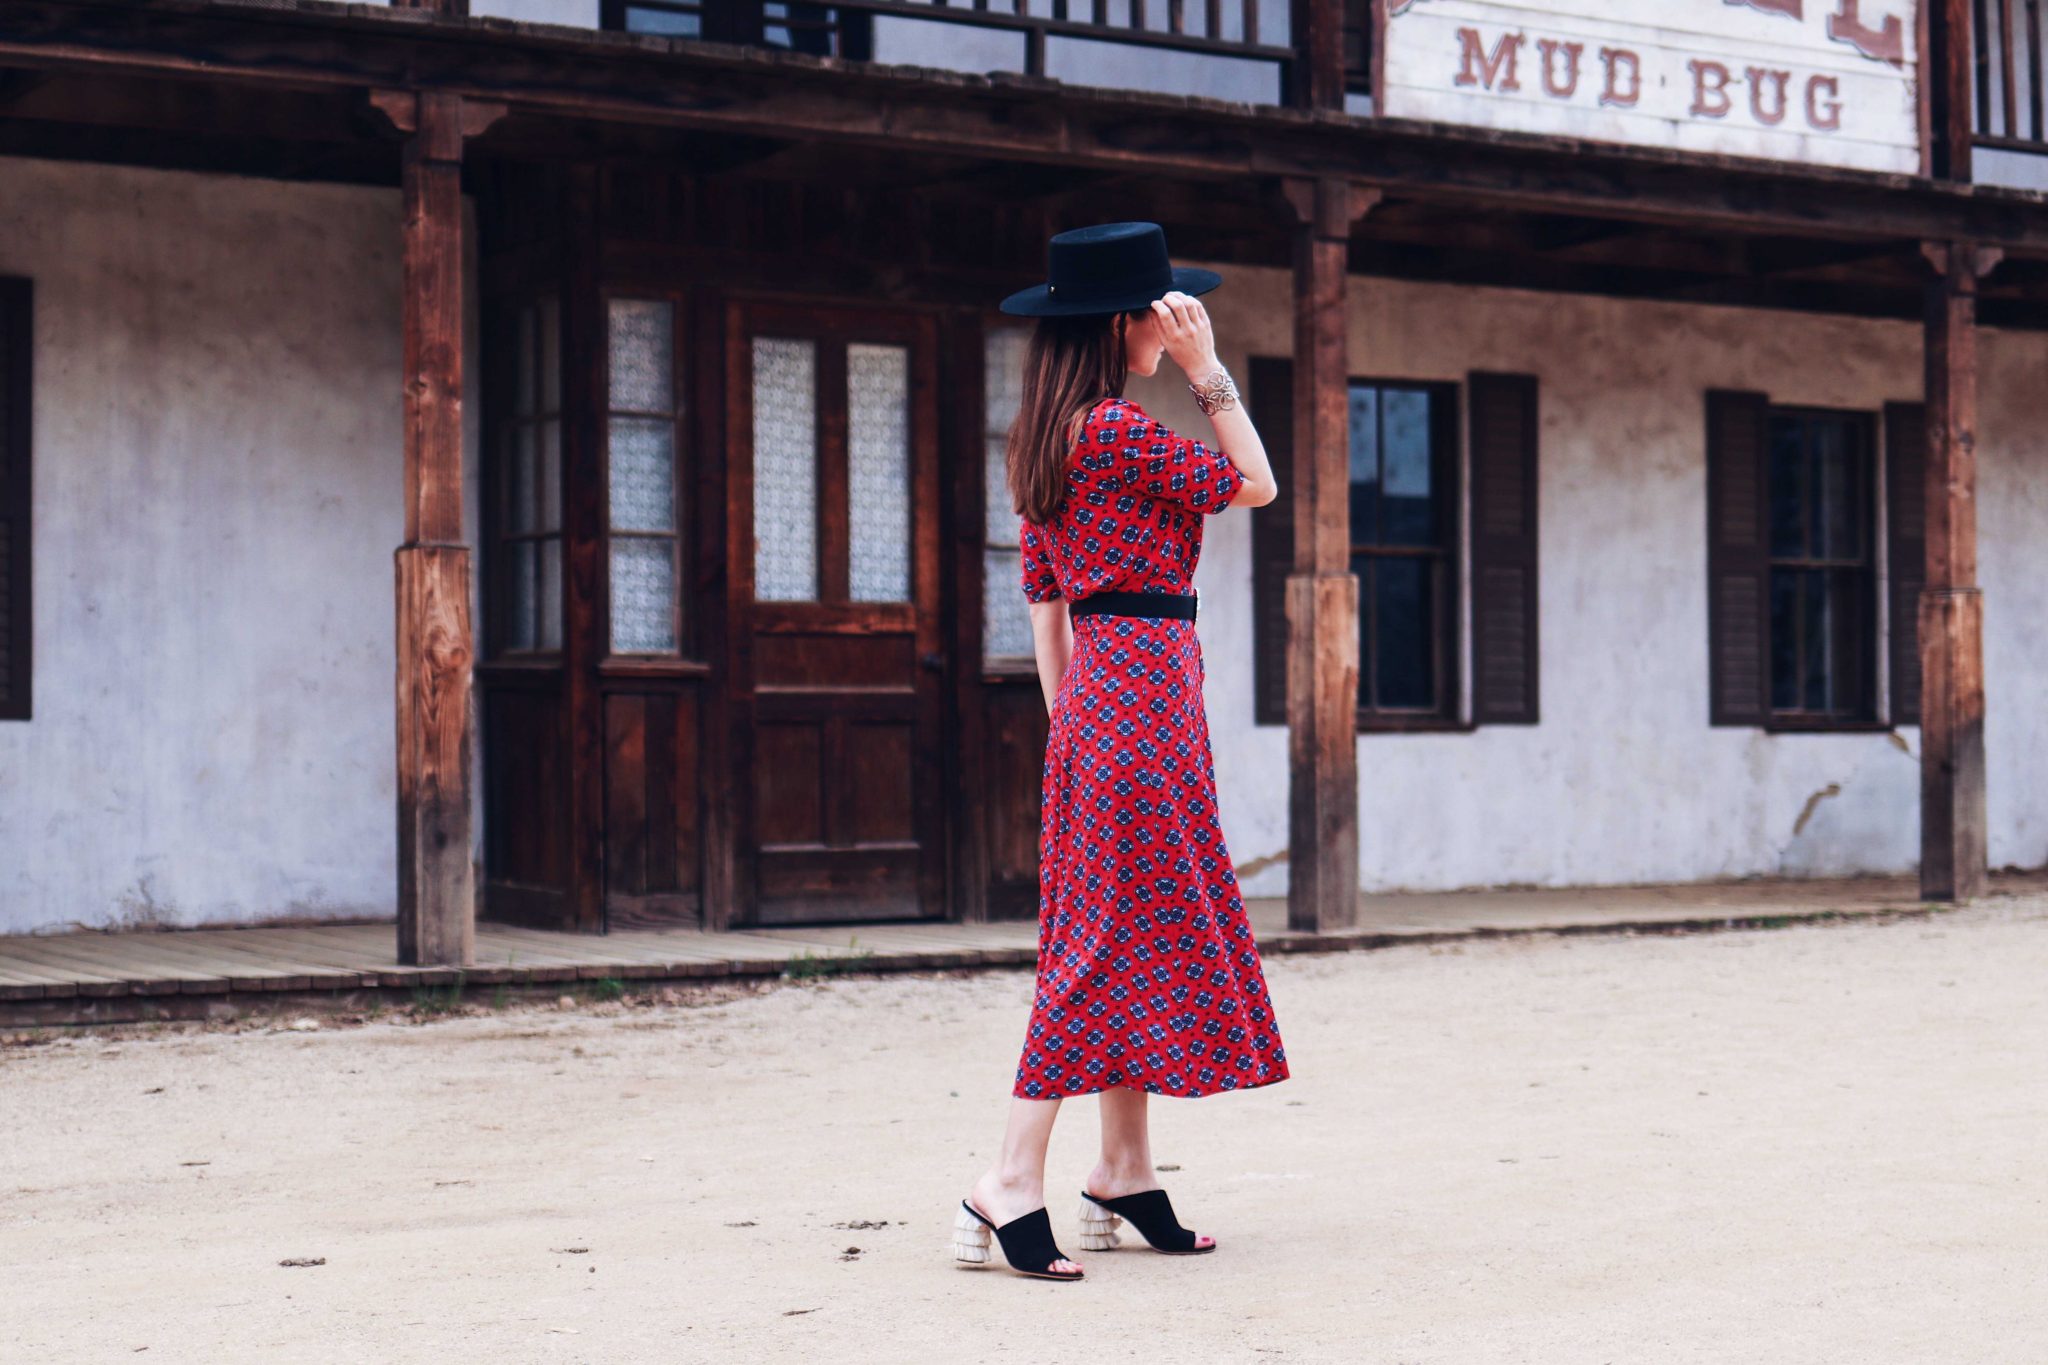 Sandro Paris Western Dress. Spring Fashion 2018 trend: Western Outfit. Channeling Westworld, one of the coolest show to watch on HBO this April - More on Houseofcomil.com. Pictures Julia Comil